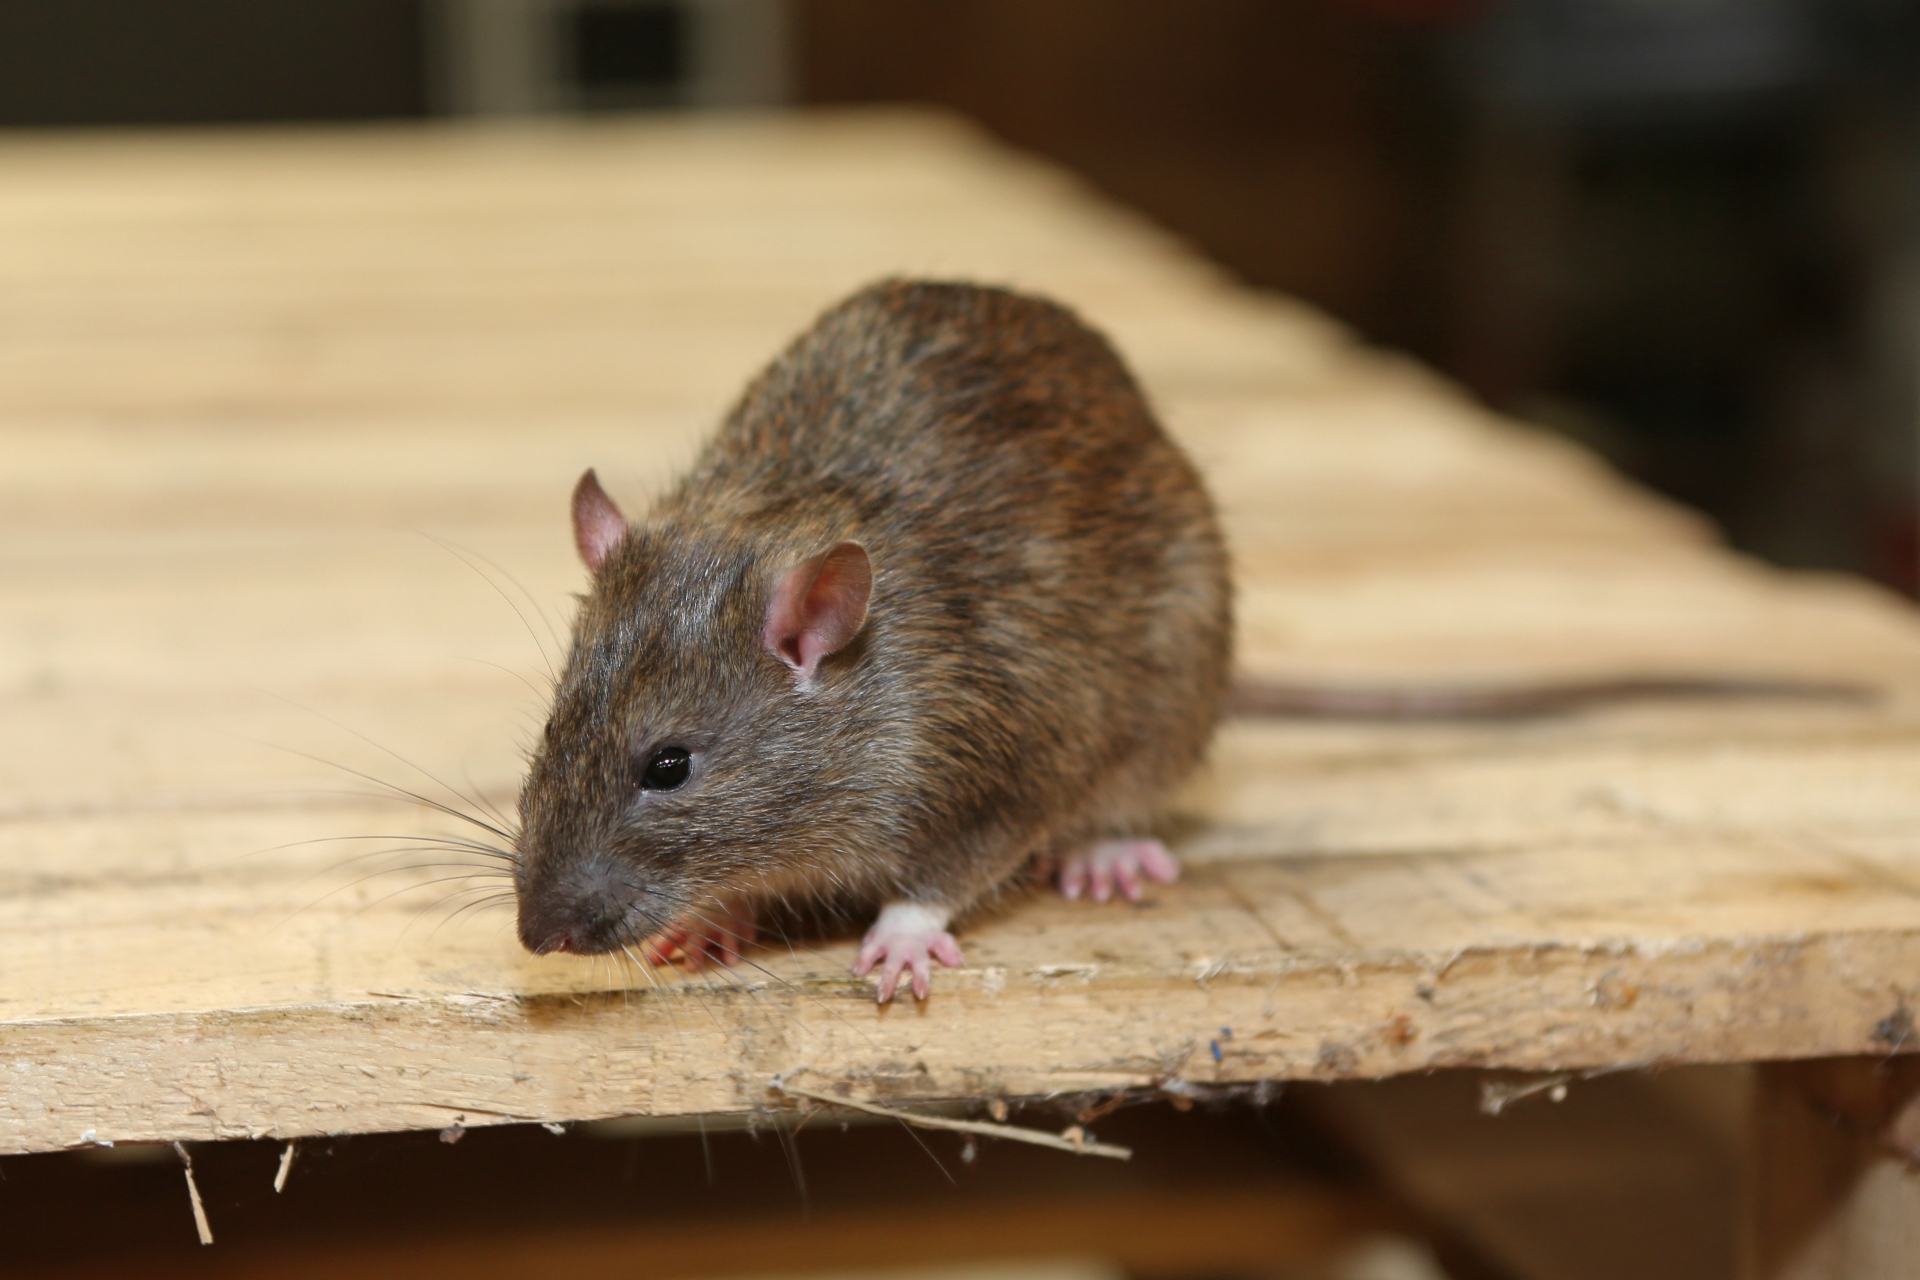 Rat Control, Pest Control in Bayswater, W2. Call Now 020 8166 9746